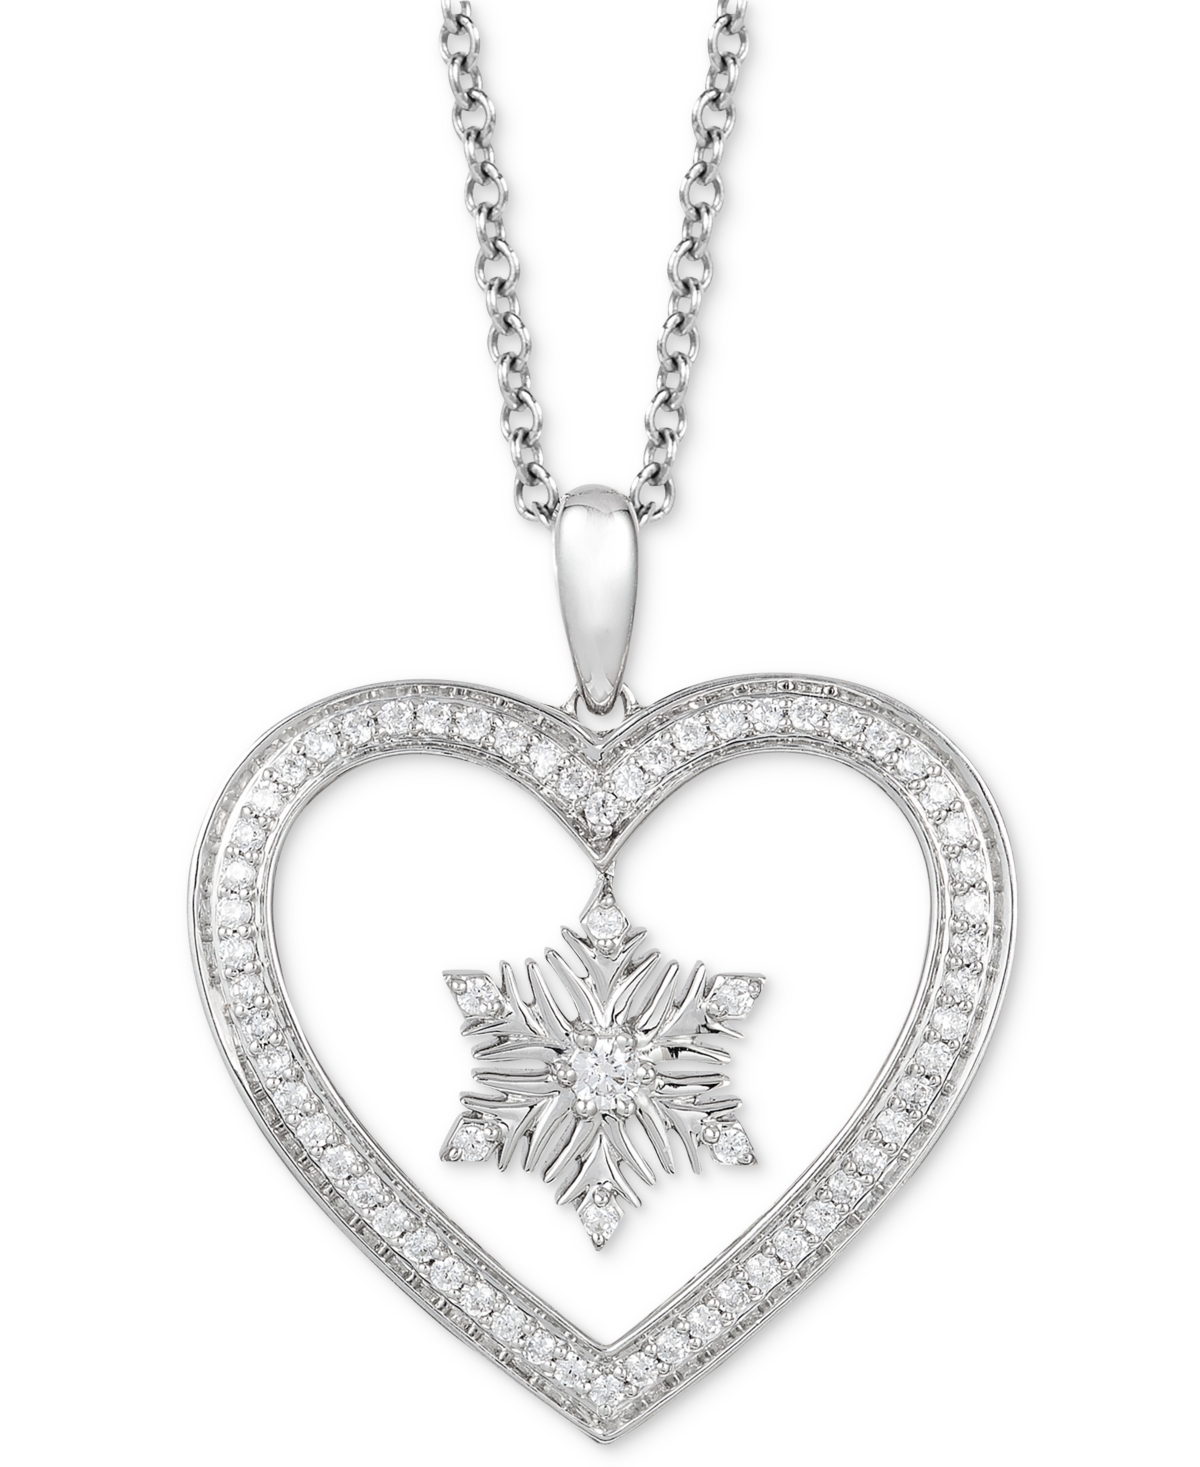 Diamond Elsa Snowflake Heart Pendant Necklace (1/5 ct. t.w.) in Sterling Silver, 16" + 2" extender - Sterling Silver